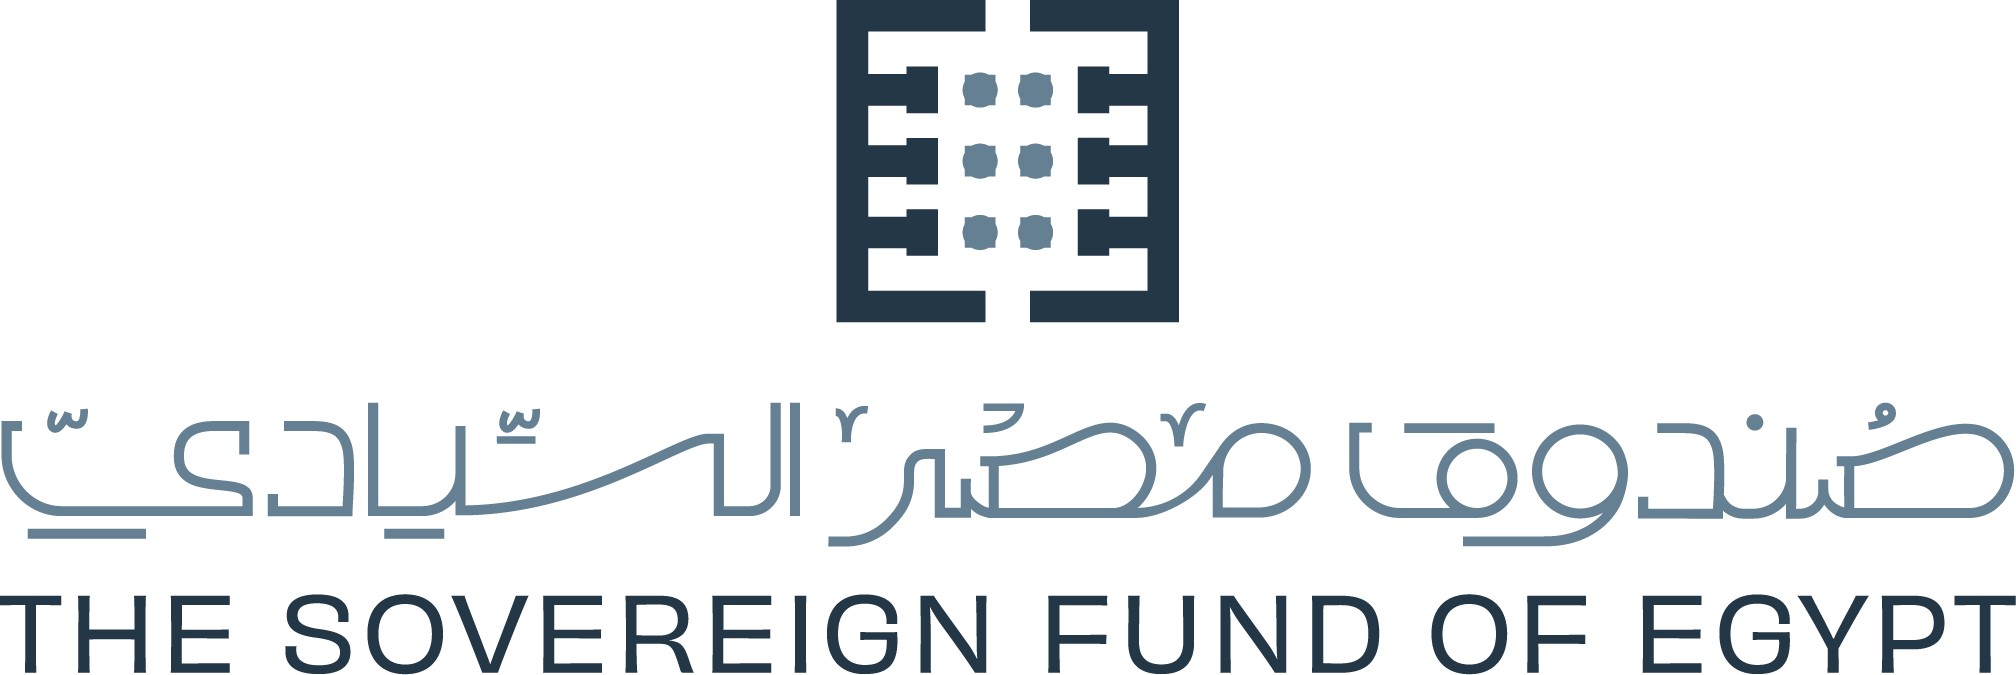 the sovereign fund of egypt